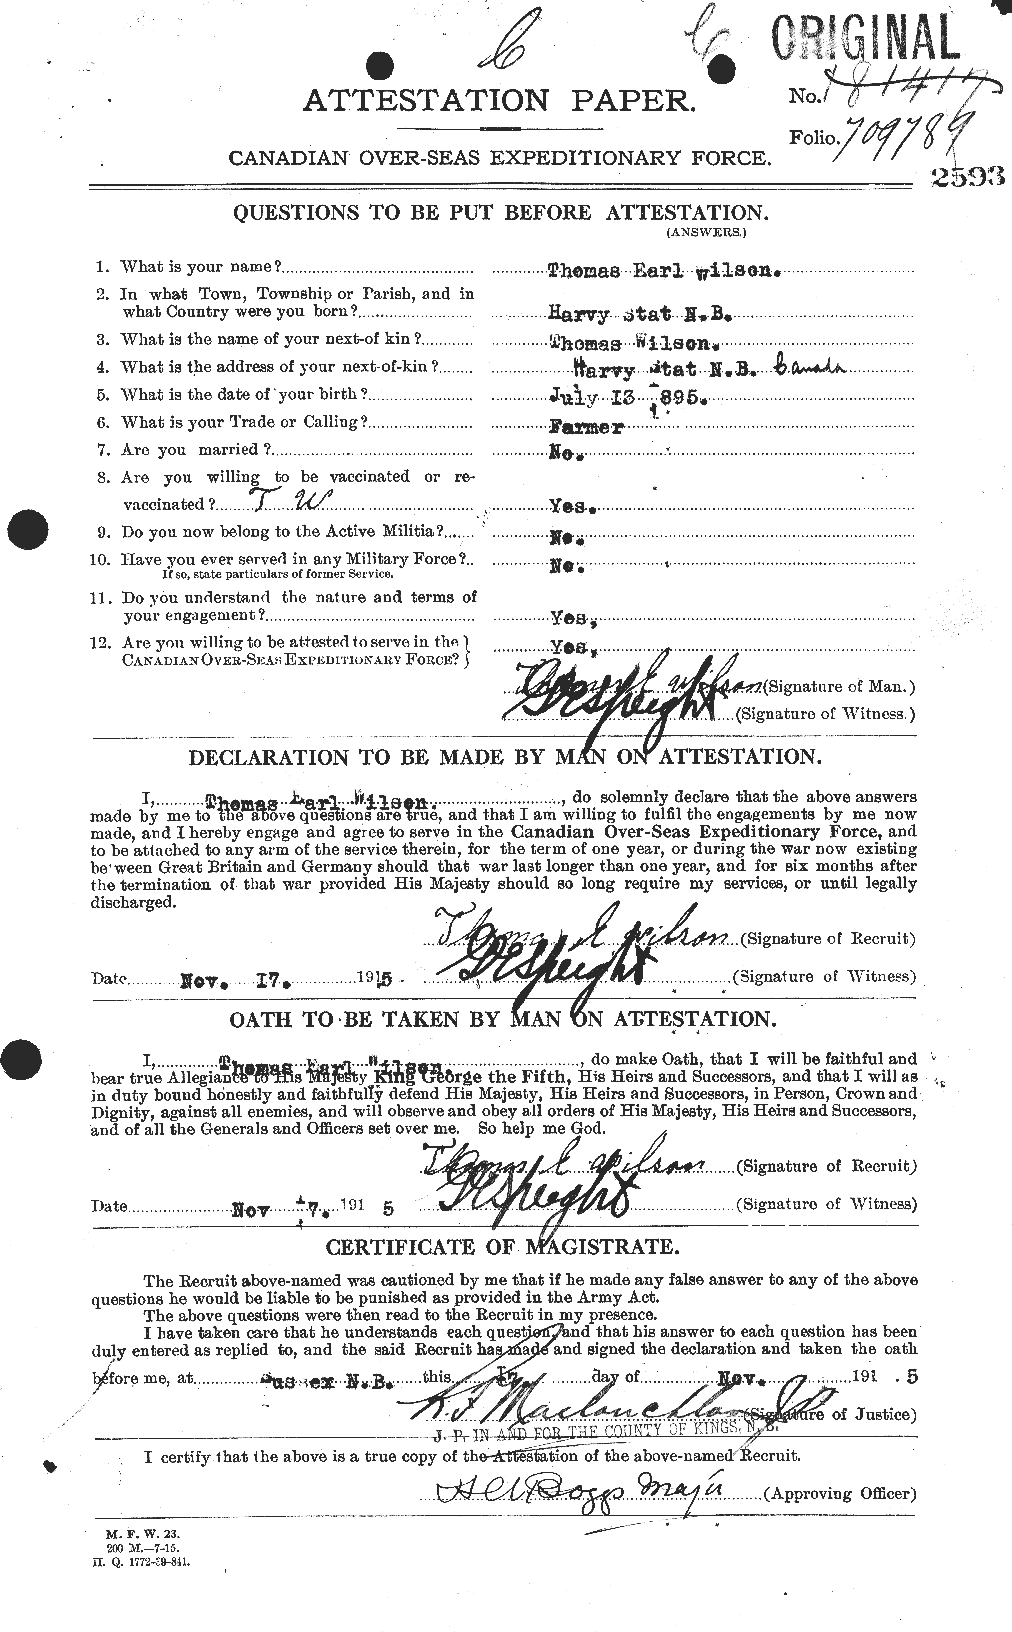 Personnel Records of the First World War - CEF 681250a